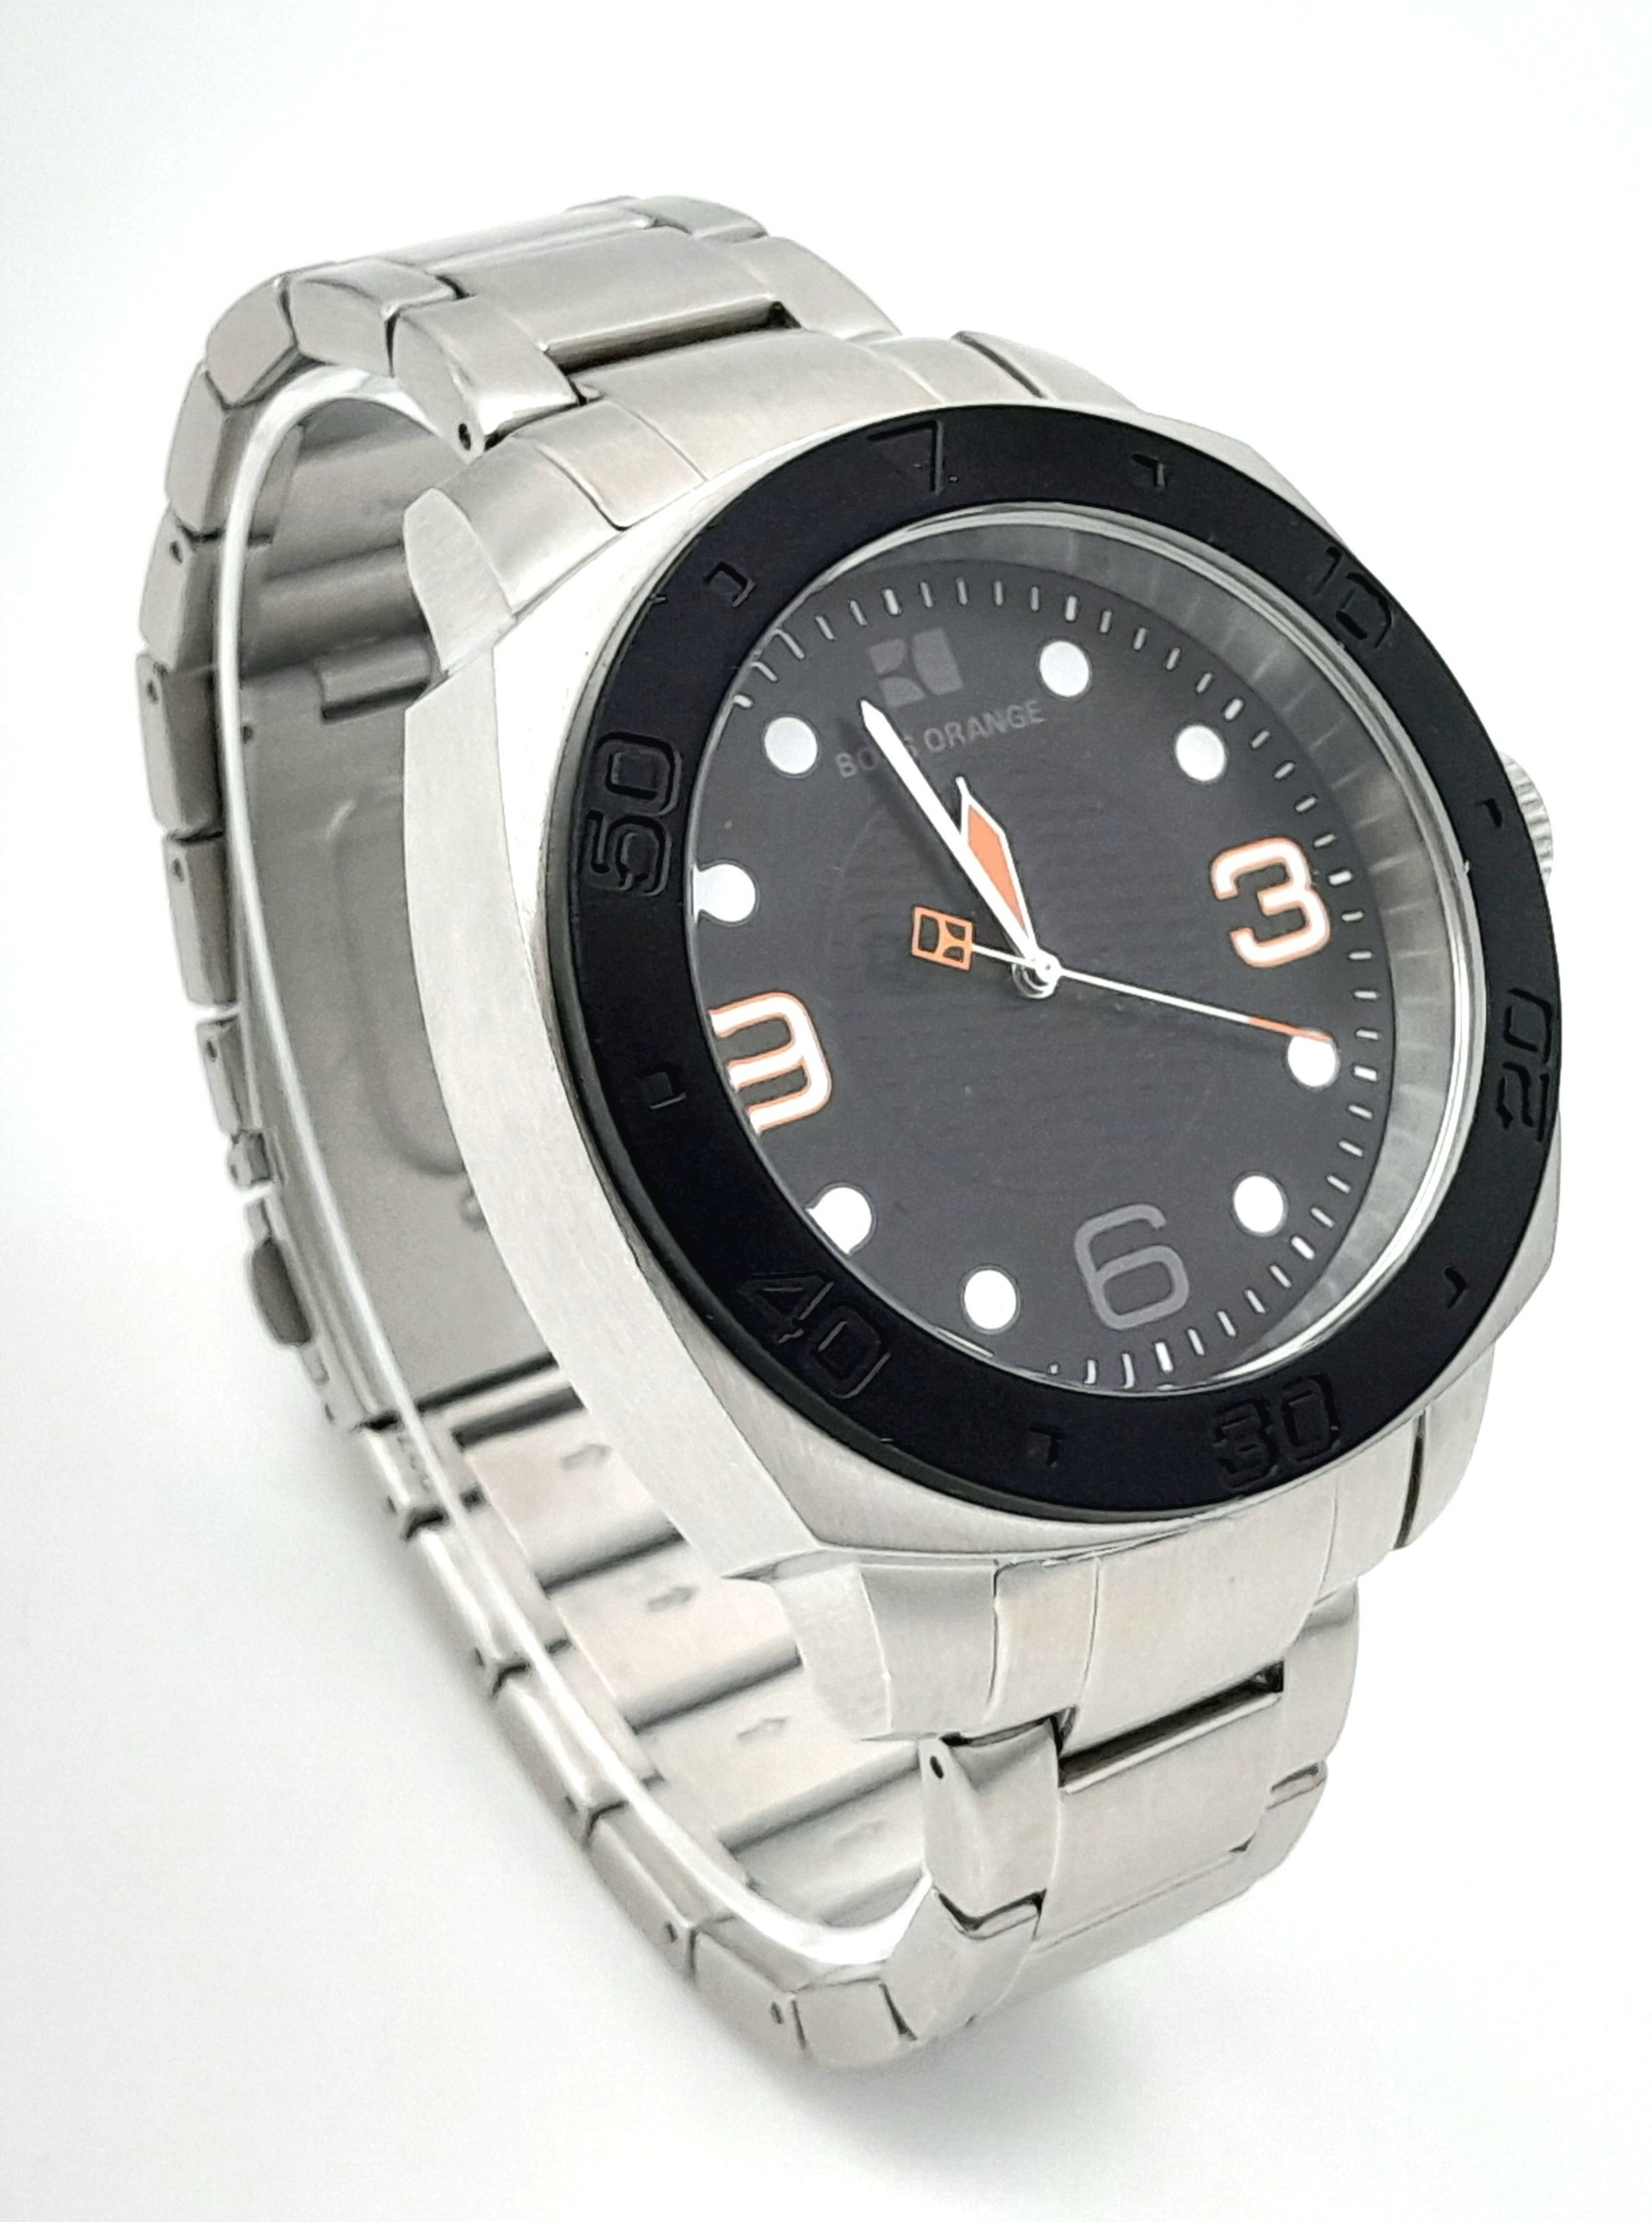 An Excellent Condition Men’s Oversized ‘Boss Orange’ Watch by Hugo Boss (50mm Case). New Battery